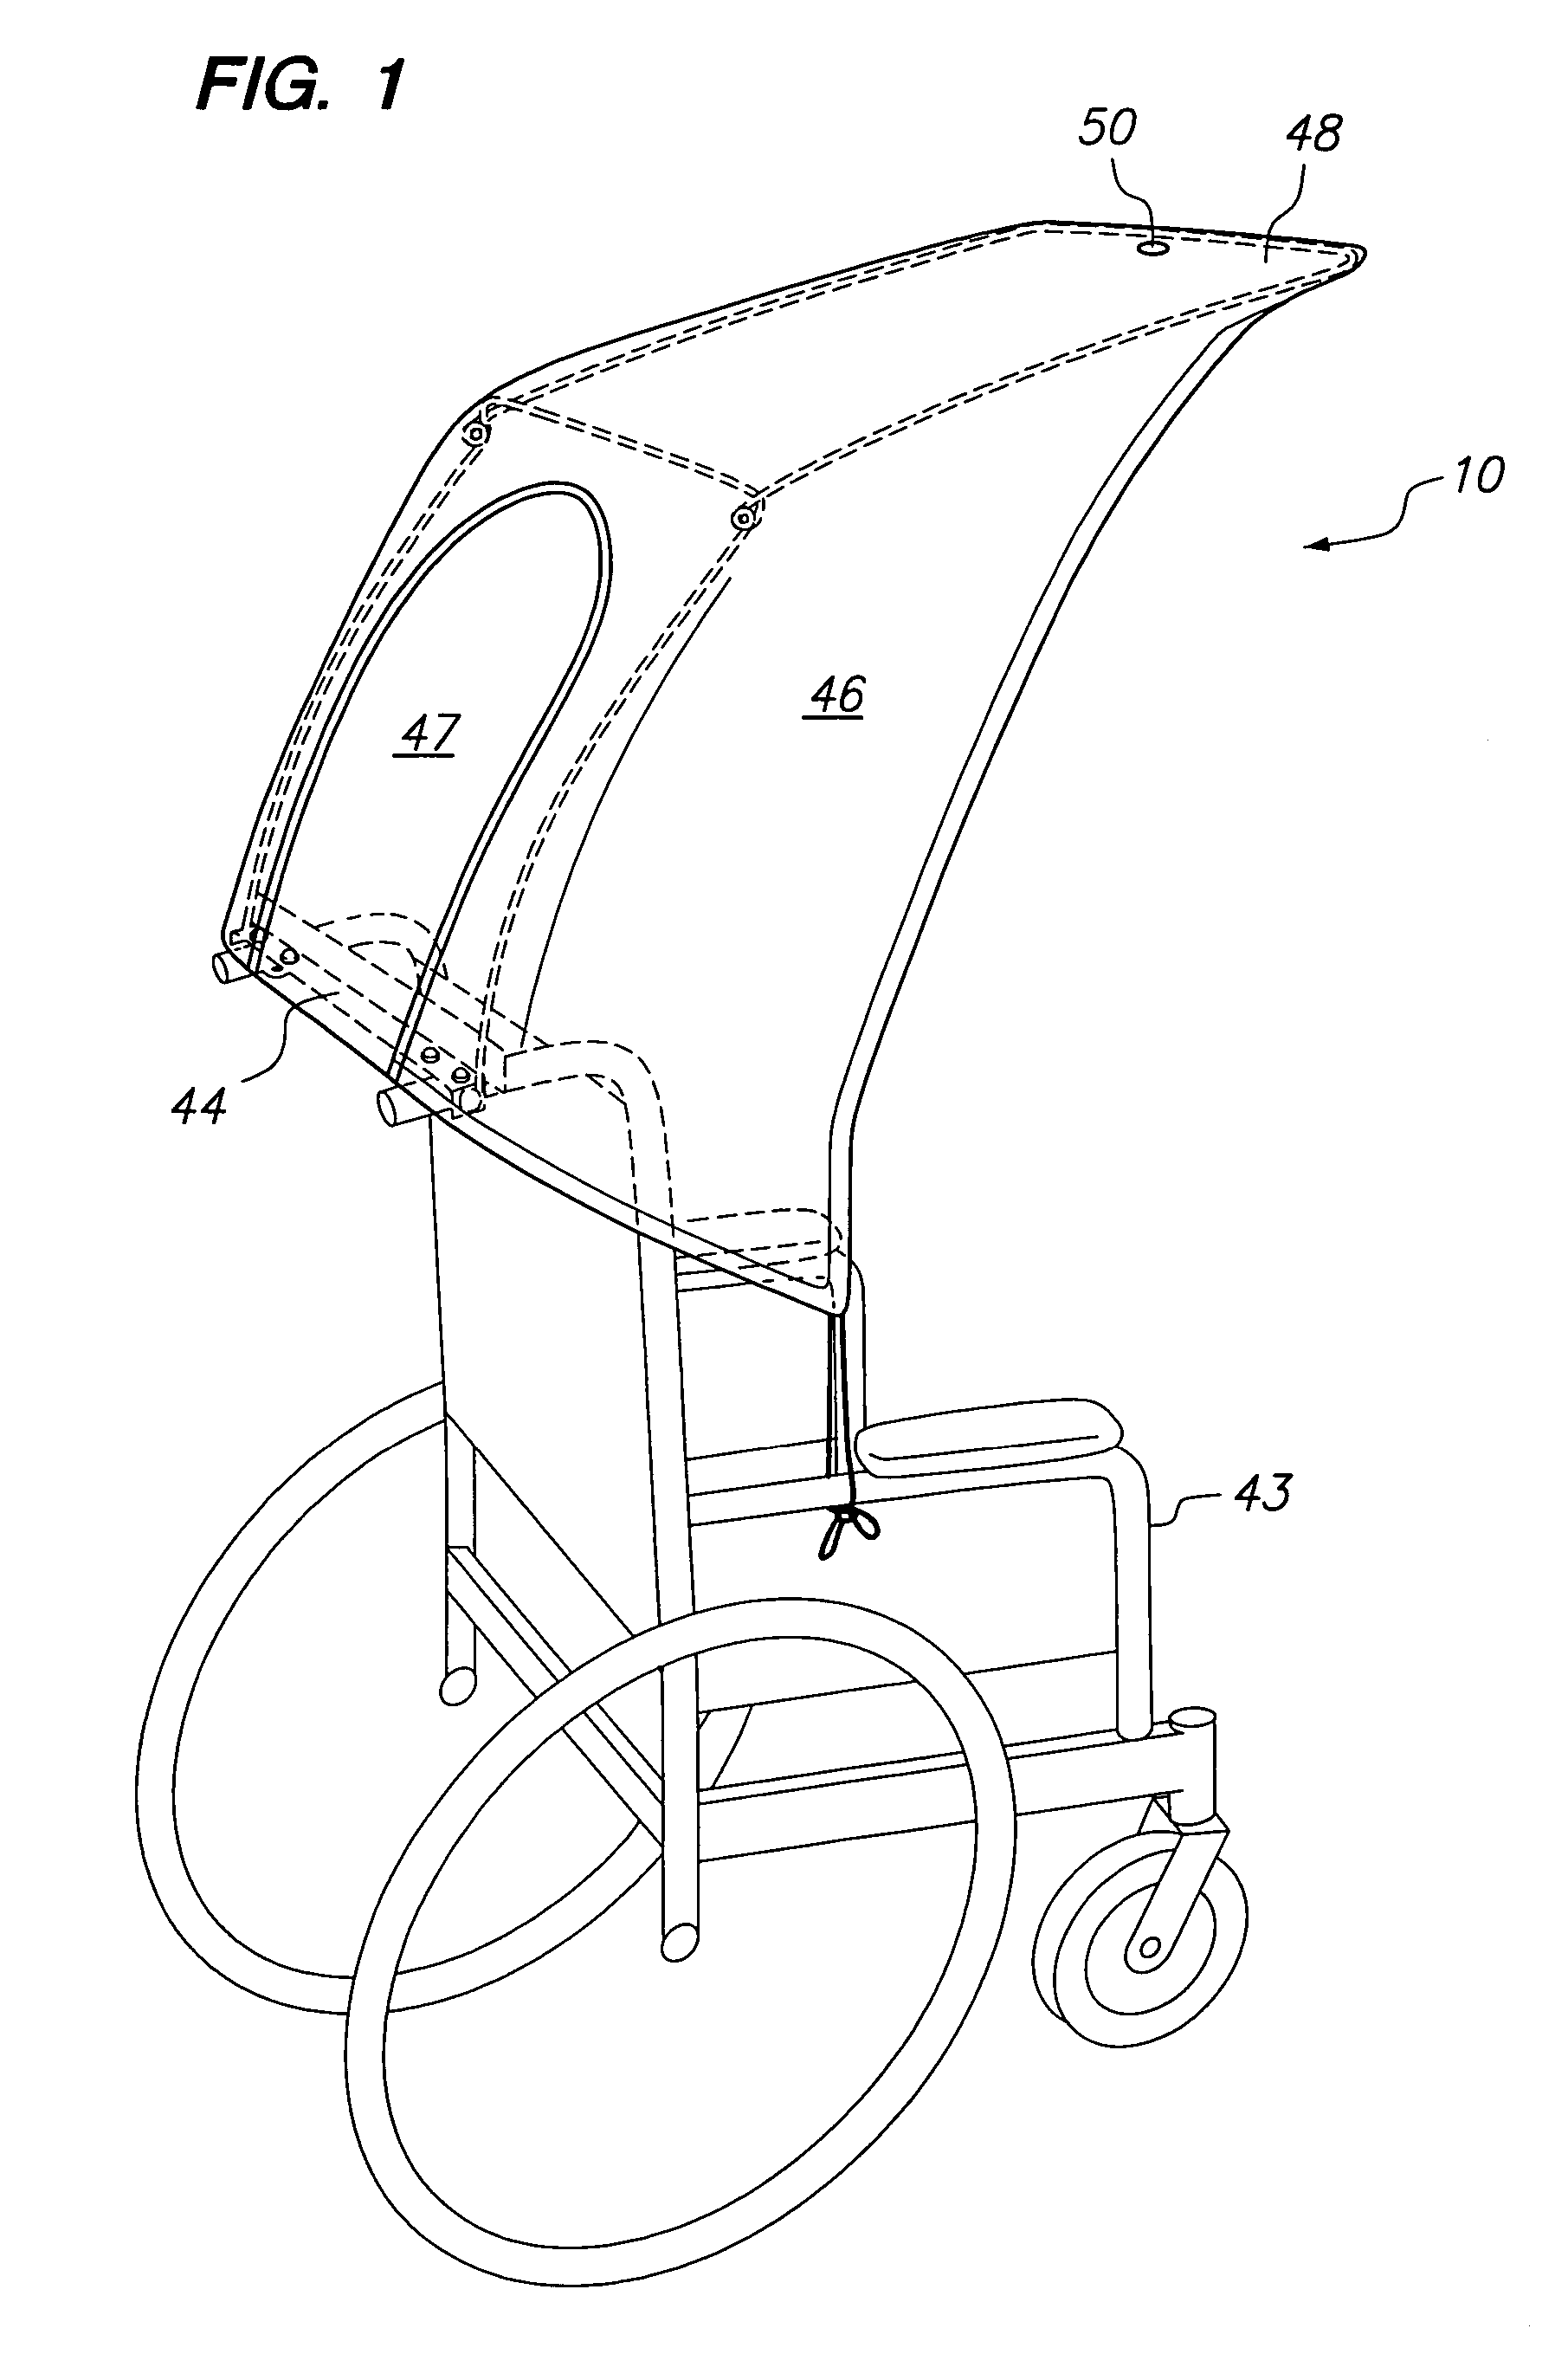 Foldable cover for the overhead protection of an occupant of a wheelchair or other wheeled vehicle